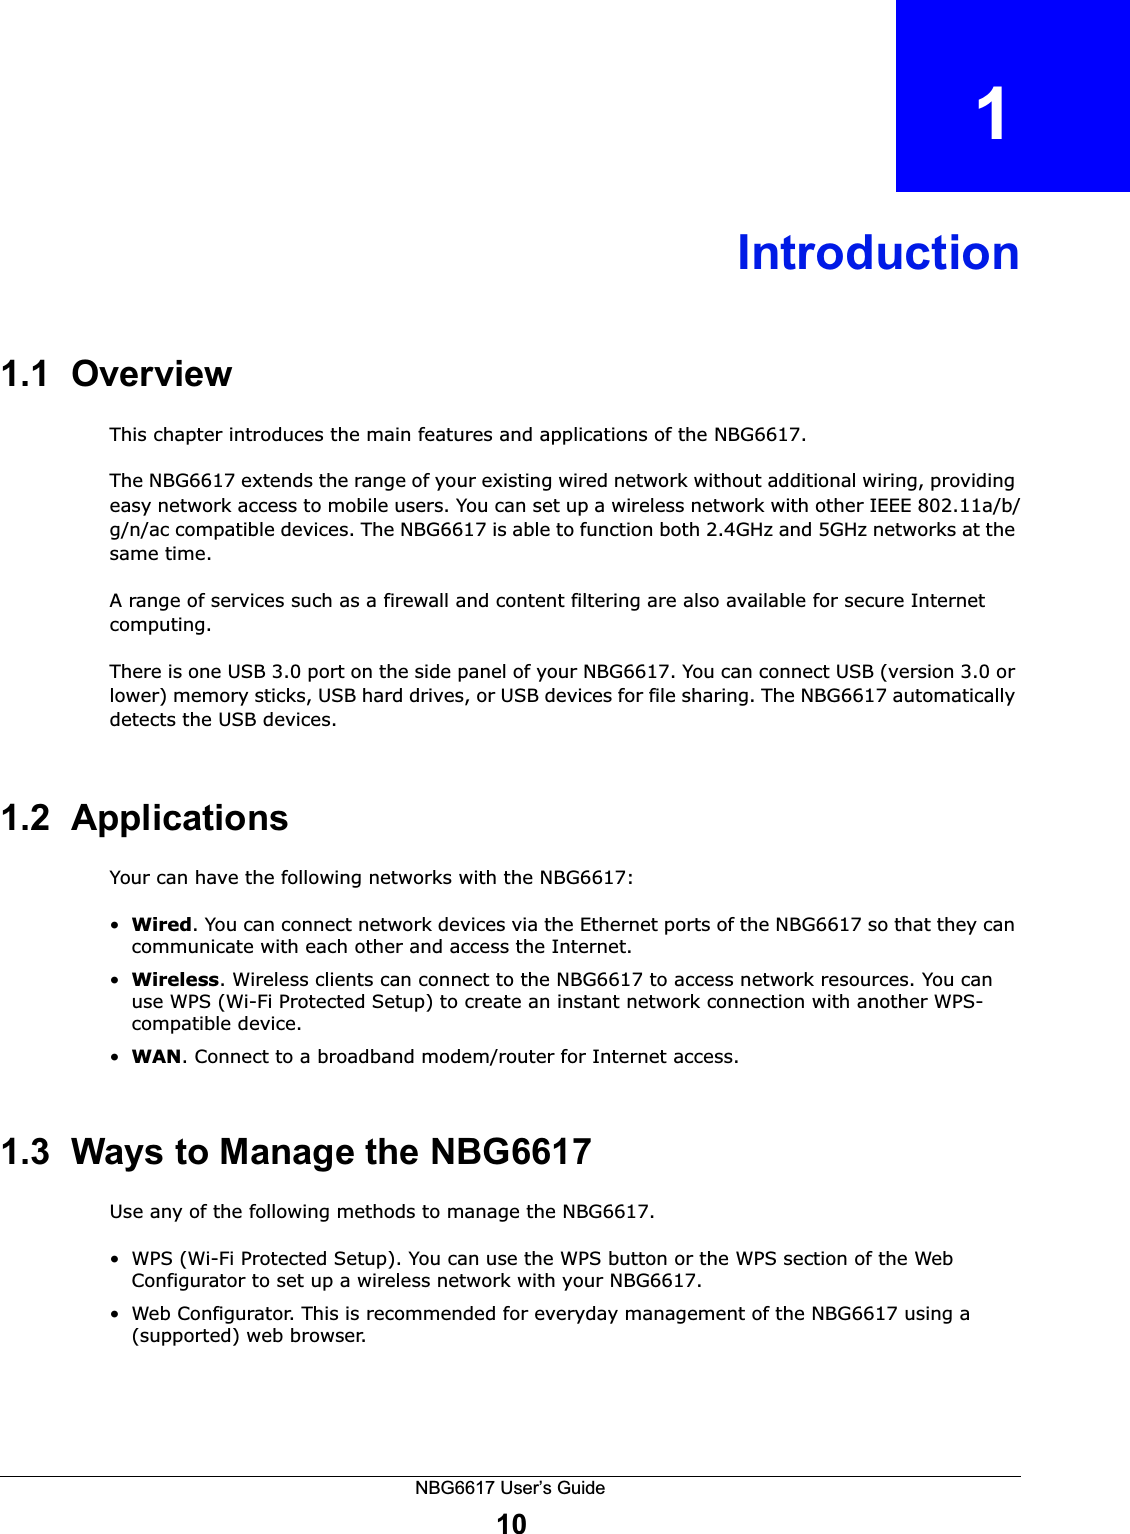 NBG6617 User’s Guide10CHAPTER   1Introduction1.1  OverviewThis chapter introduces the main features and applications of the NBG6617.The NBG6617 extends the range of your existing wired network without additional wiring, providing easy network access to mobile users. You can set up a wireless network with other IEEE 802.11a/b/g/n/ac compatible devices. The NBG6617 is able to function both 2.4GHz and 5GHz networks at the same time.A range of services such as a firewall and content filtering are also available for secure Internet computing. There is one USB 3.0 port on the side panel of your NBG6617. You can connect USB (version 3.0 or lower) memory sticks, USB hard drives, or USB devices for file sharing. The NBG6617 automatically detects the USB devices. 1.2  ApplicationsYour can have the following networks with the NBG6617:•Wired. You can connect network devices via the Ethernet ports of the NBG6617 so that they can communicate with each other and access the Internet.•Wireless. Wireless clients can connect to the NBG6617 to access network resources. You can use WPS (Wi-Fi Protected Setup) to create an instant network connection with another WPS-compatible device.•WAN. Connect to a broadband modem/router for Internet access.1.3  Ways to Manage the NBG6617Use any of the following methods to manage the NBG6617.• WPS (Wi-Fi Protected Setup). You can use the WPS button or the WPS section of the Web Configurator to set up a wireless network with your NBG6617.• Web Configurator. This is recommended for everyday management of the NBG6617 using a (supported) web browser.